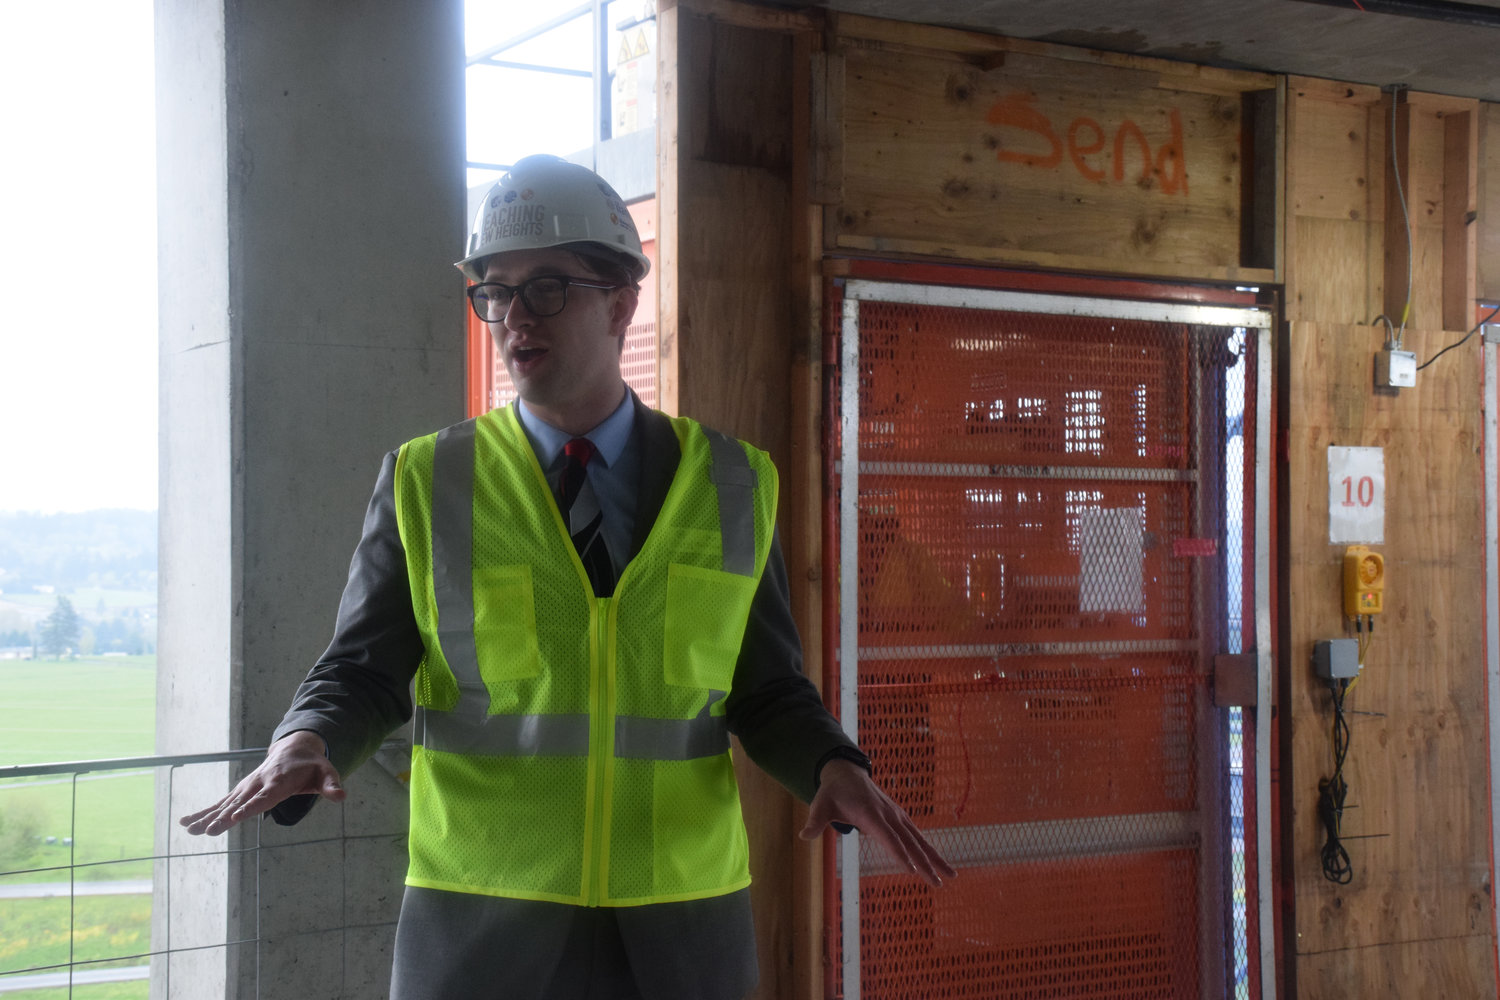 Don Walkinshaw, marketing manager for ilani, discusses plans for the under-construction hotel at the casino resort on the 10th floor of the building April 25.